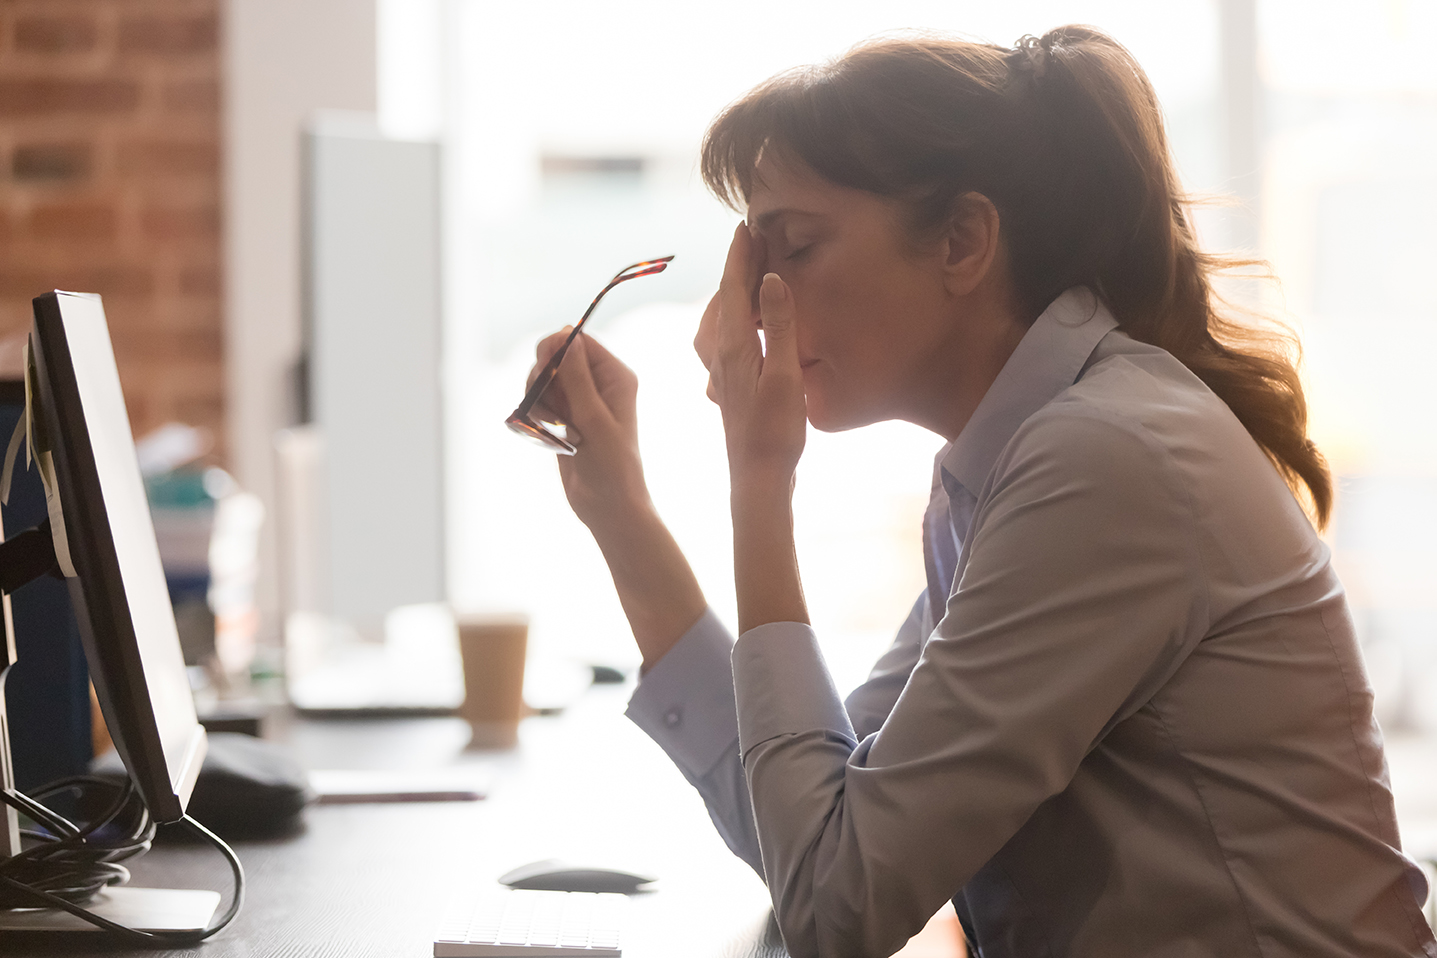 Exhausted female worker sit at office desk take off glasses feel unwell having dizziness or blurry vision, tired woman employee suffer from migraine or headache unable to work. Health problem concept